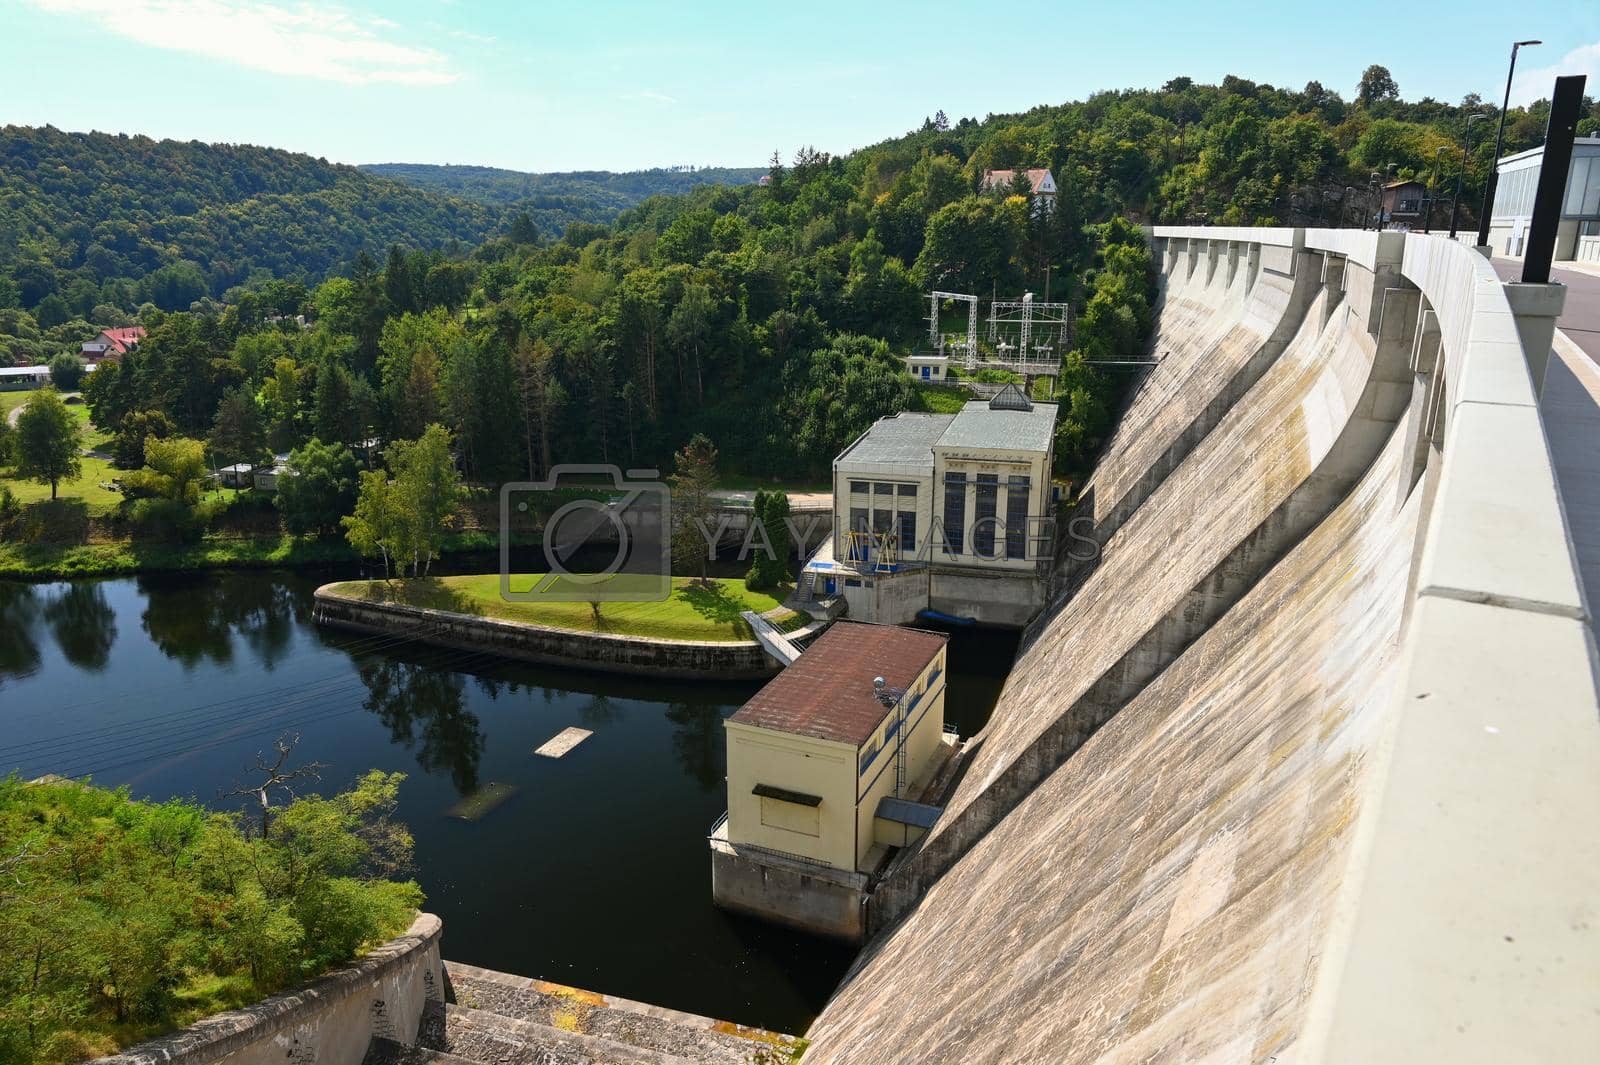 Royalty free image of Water dam Vir-Czech Republic-Europe. Reservoir of drinking water and hydraulic power plant. by Montypeter